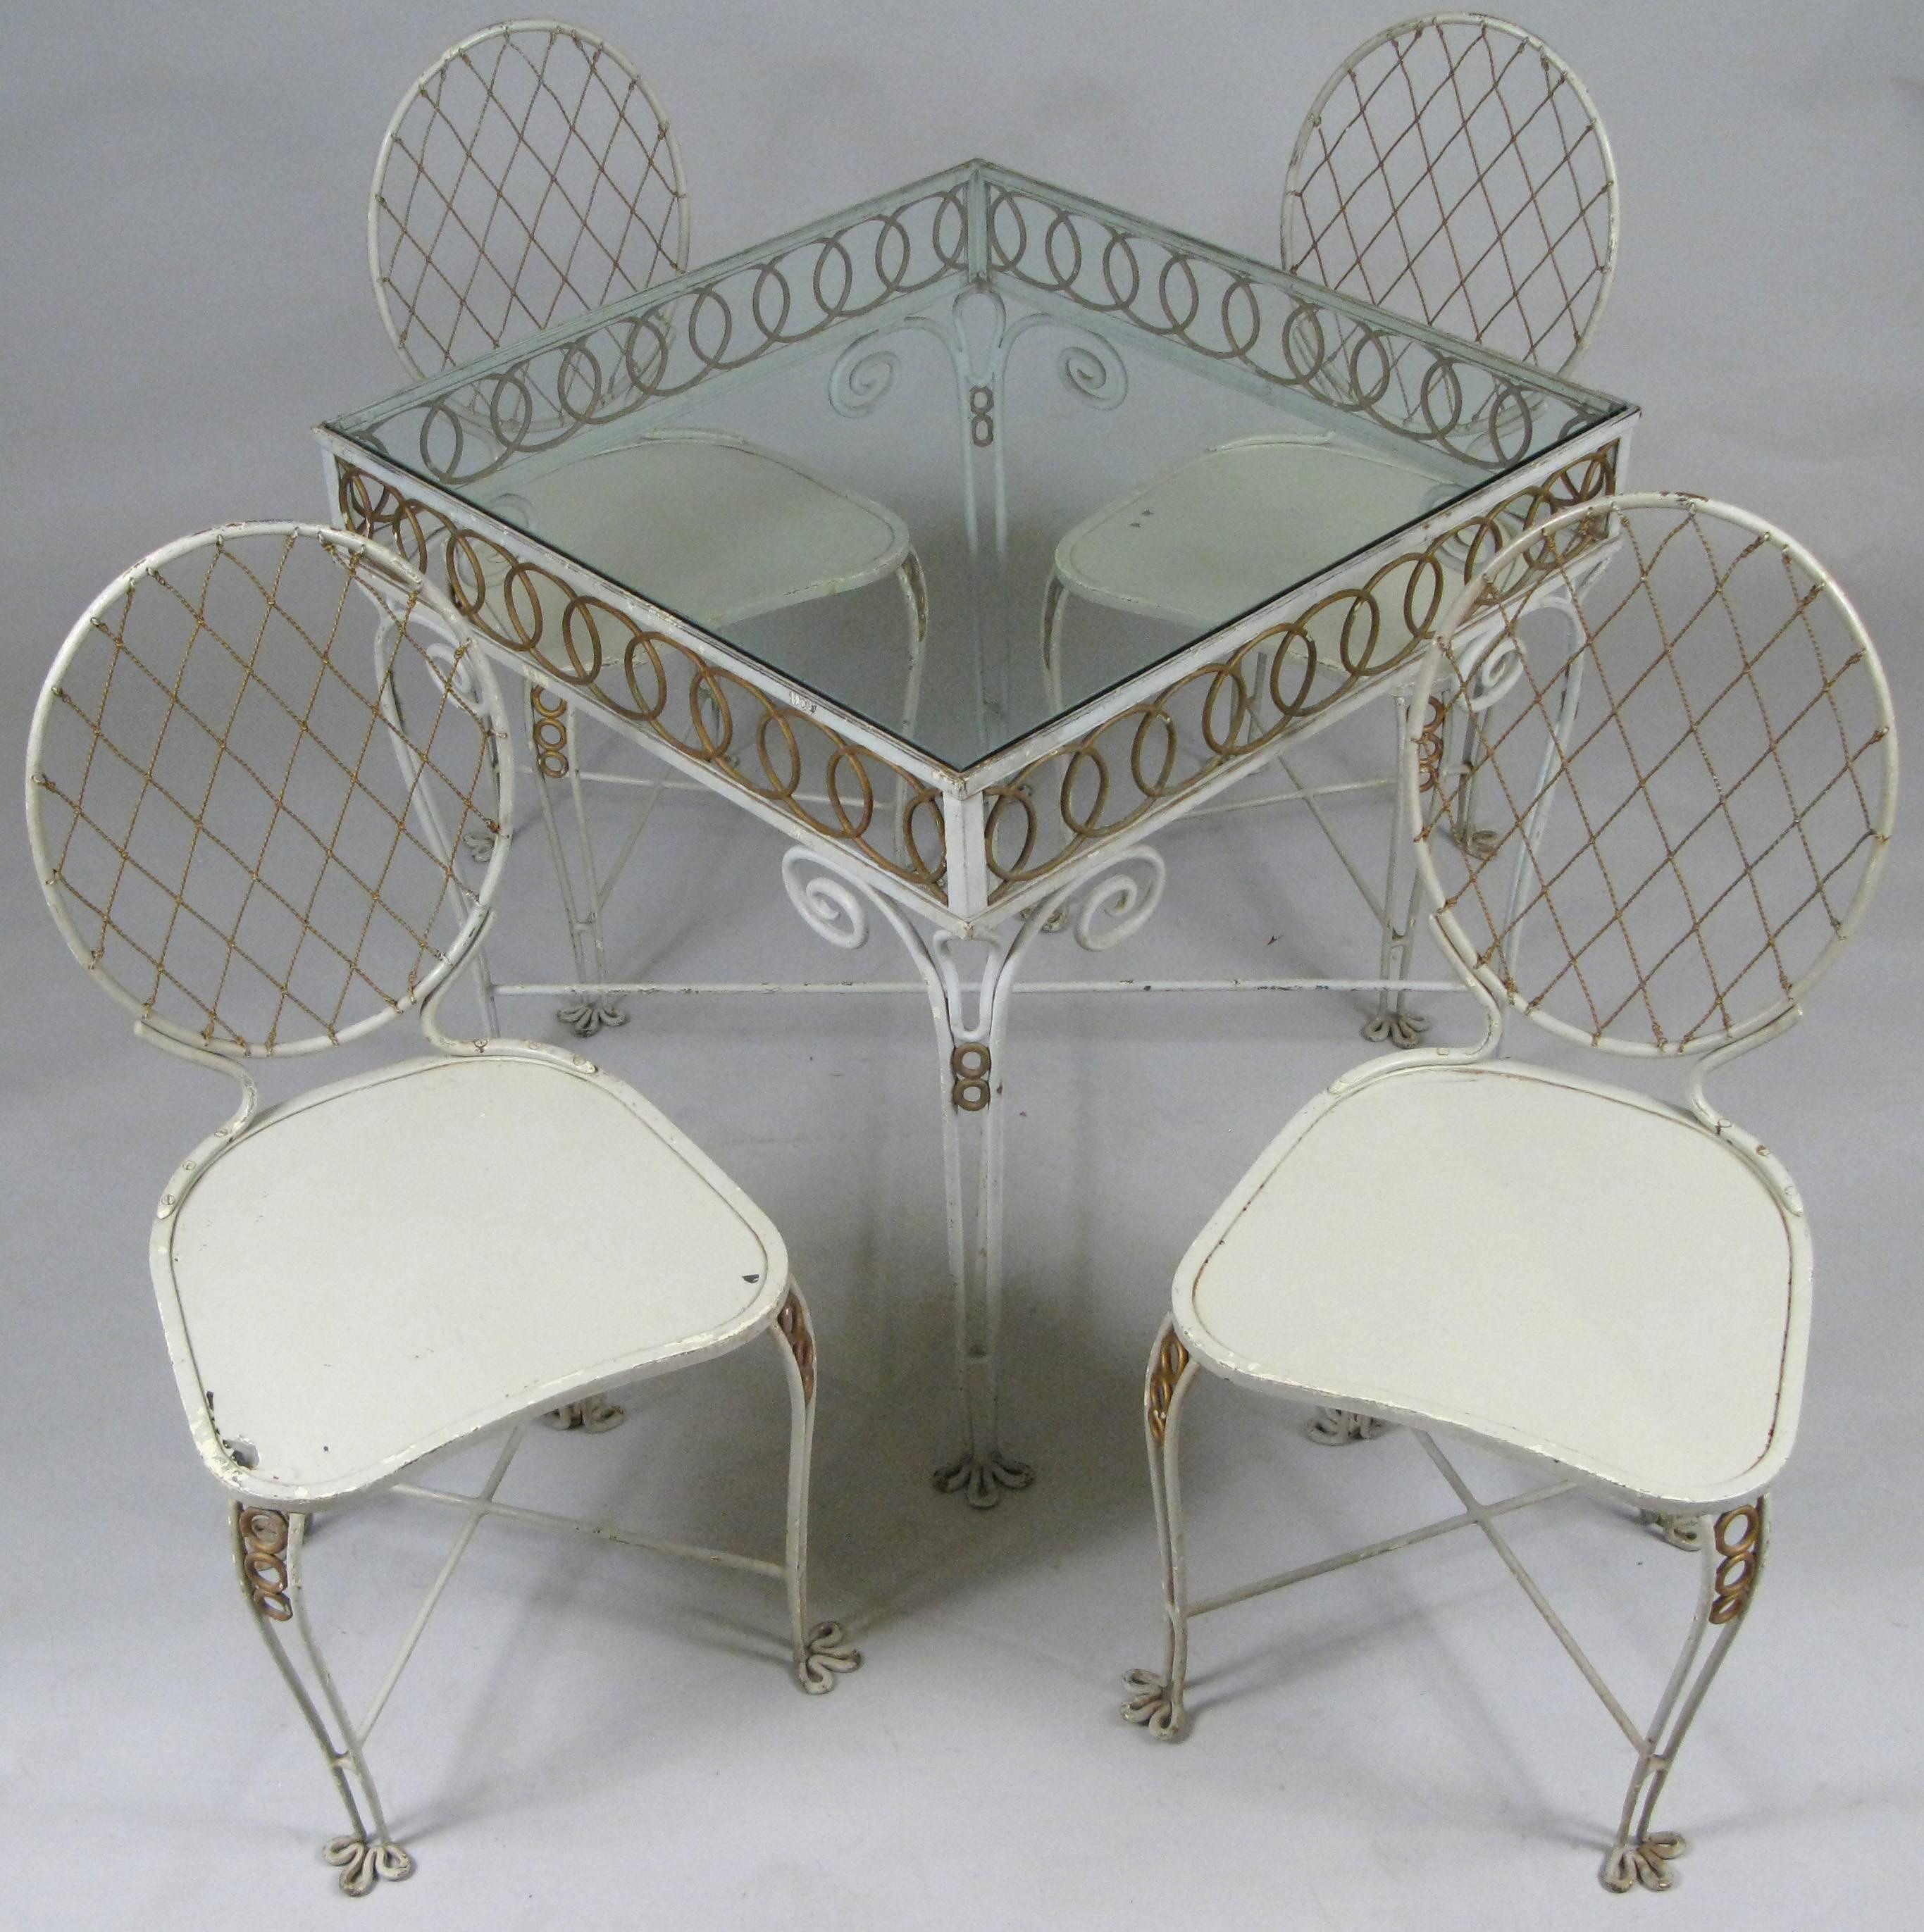 An absolutely charming vintage 1940s dining set with wrought iron frames and gold painted details. The chair backs made with twisted gilded wire in a lattice formation. The details are beautiful, including the flower form feet on the chairs and